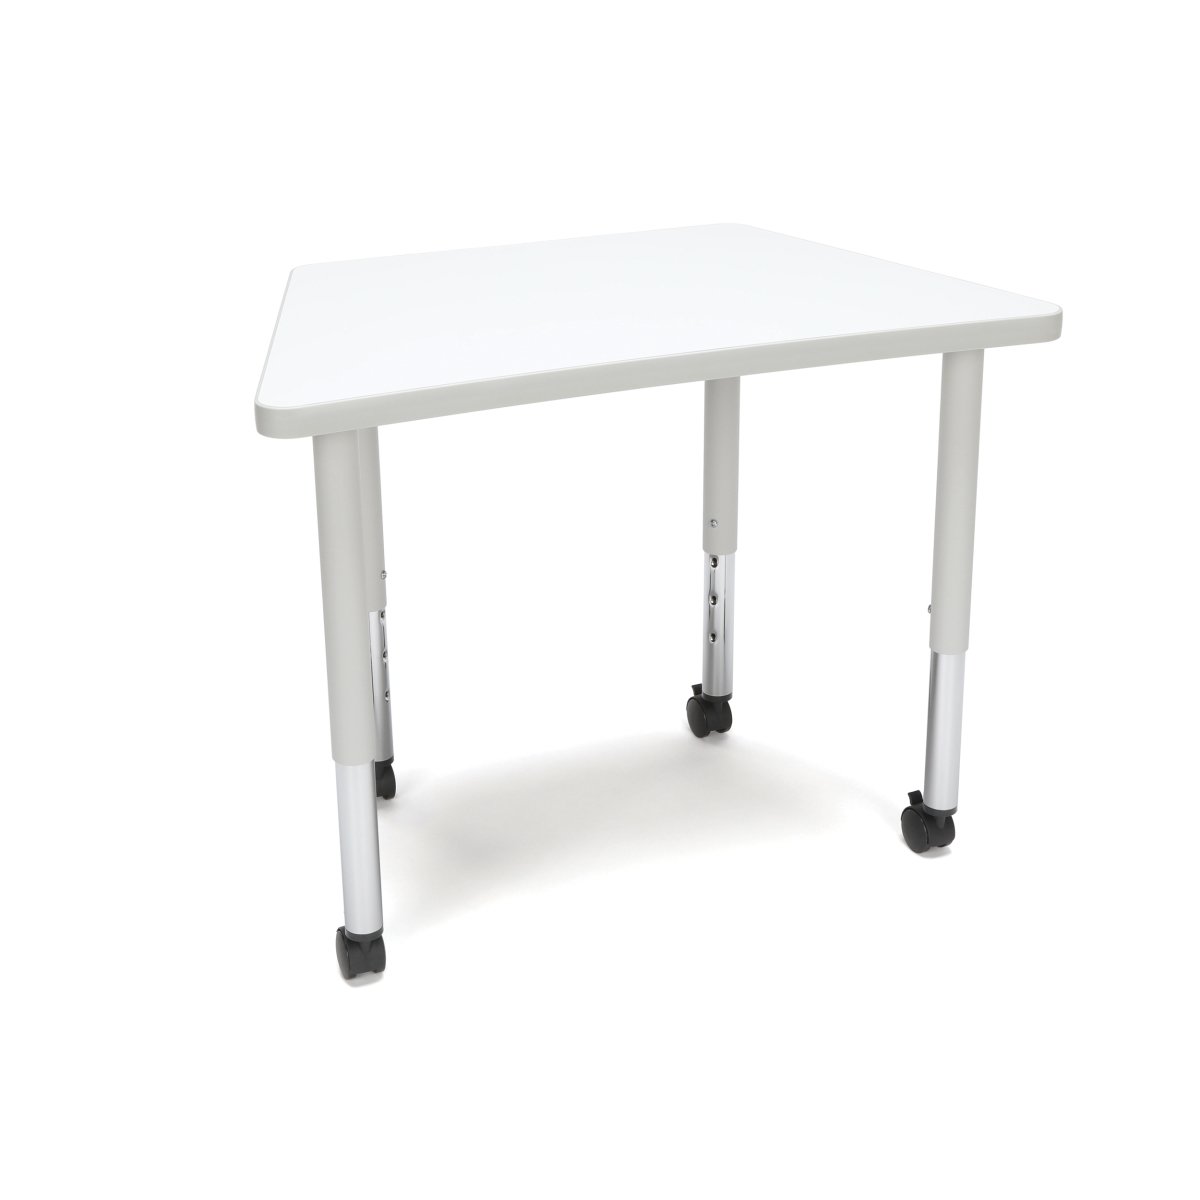 Trap-slc-wht Adapt Series Trapezoid Student Table - 20-28 In. Height Adjustable Desk With Casters, White